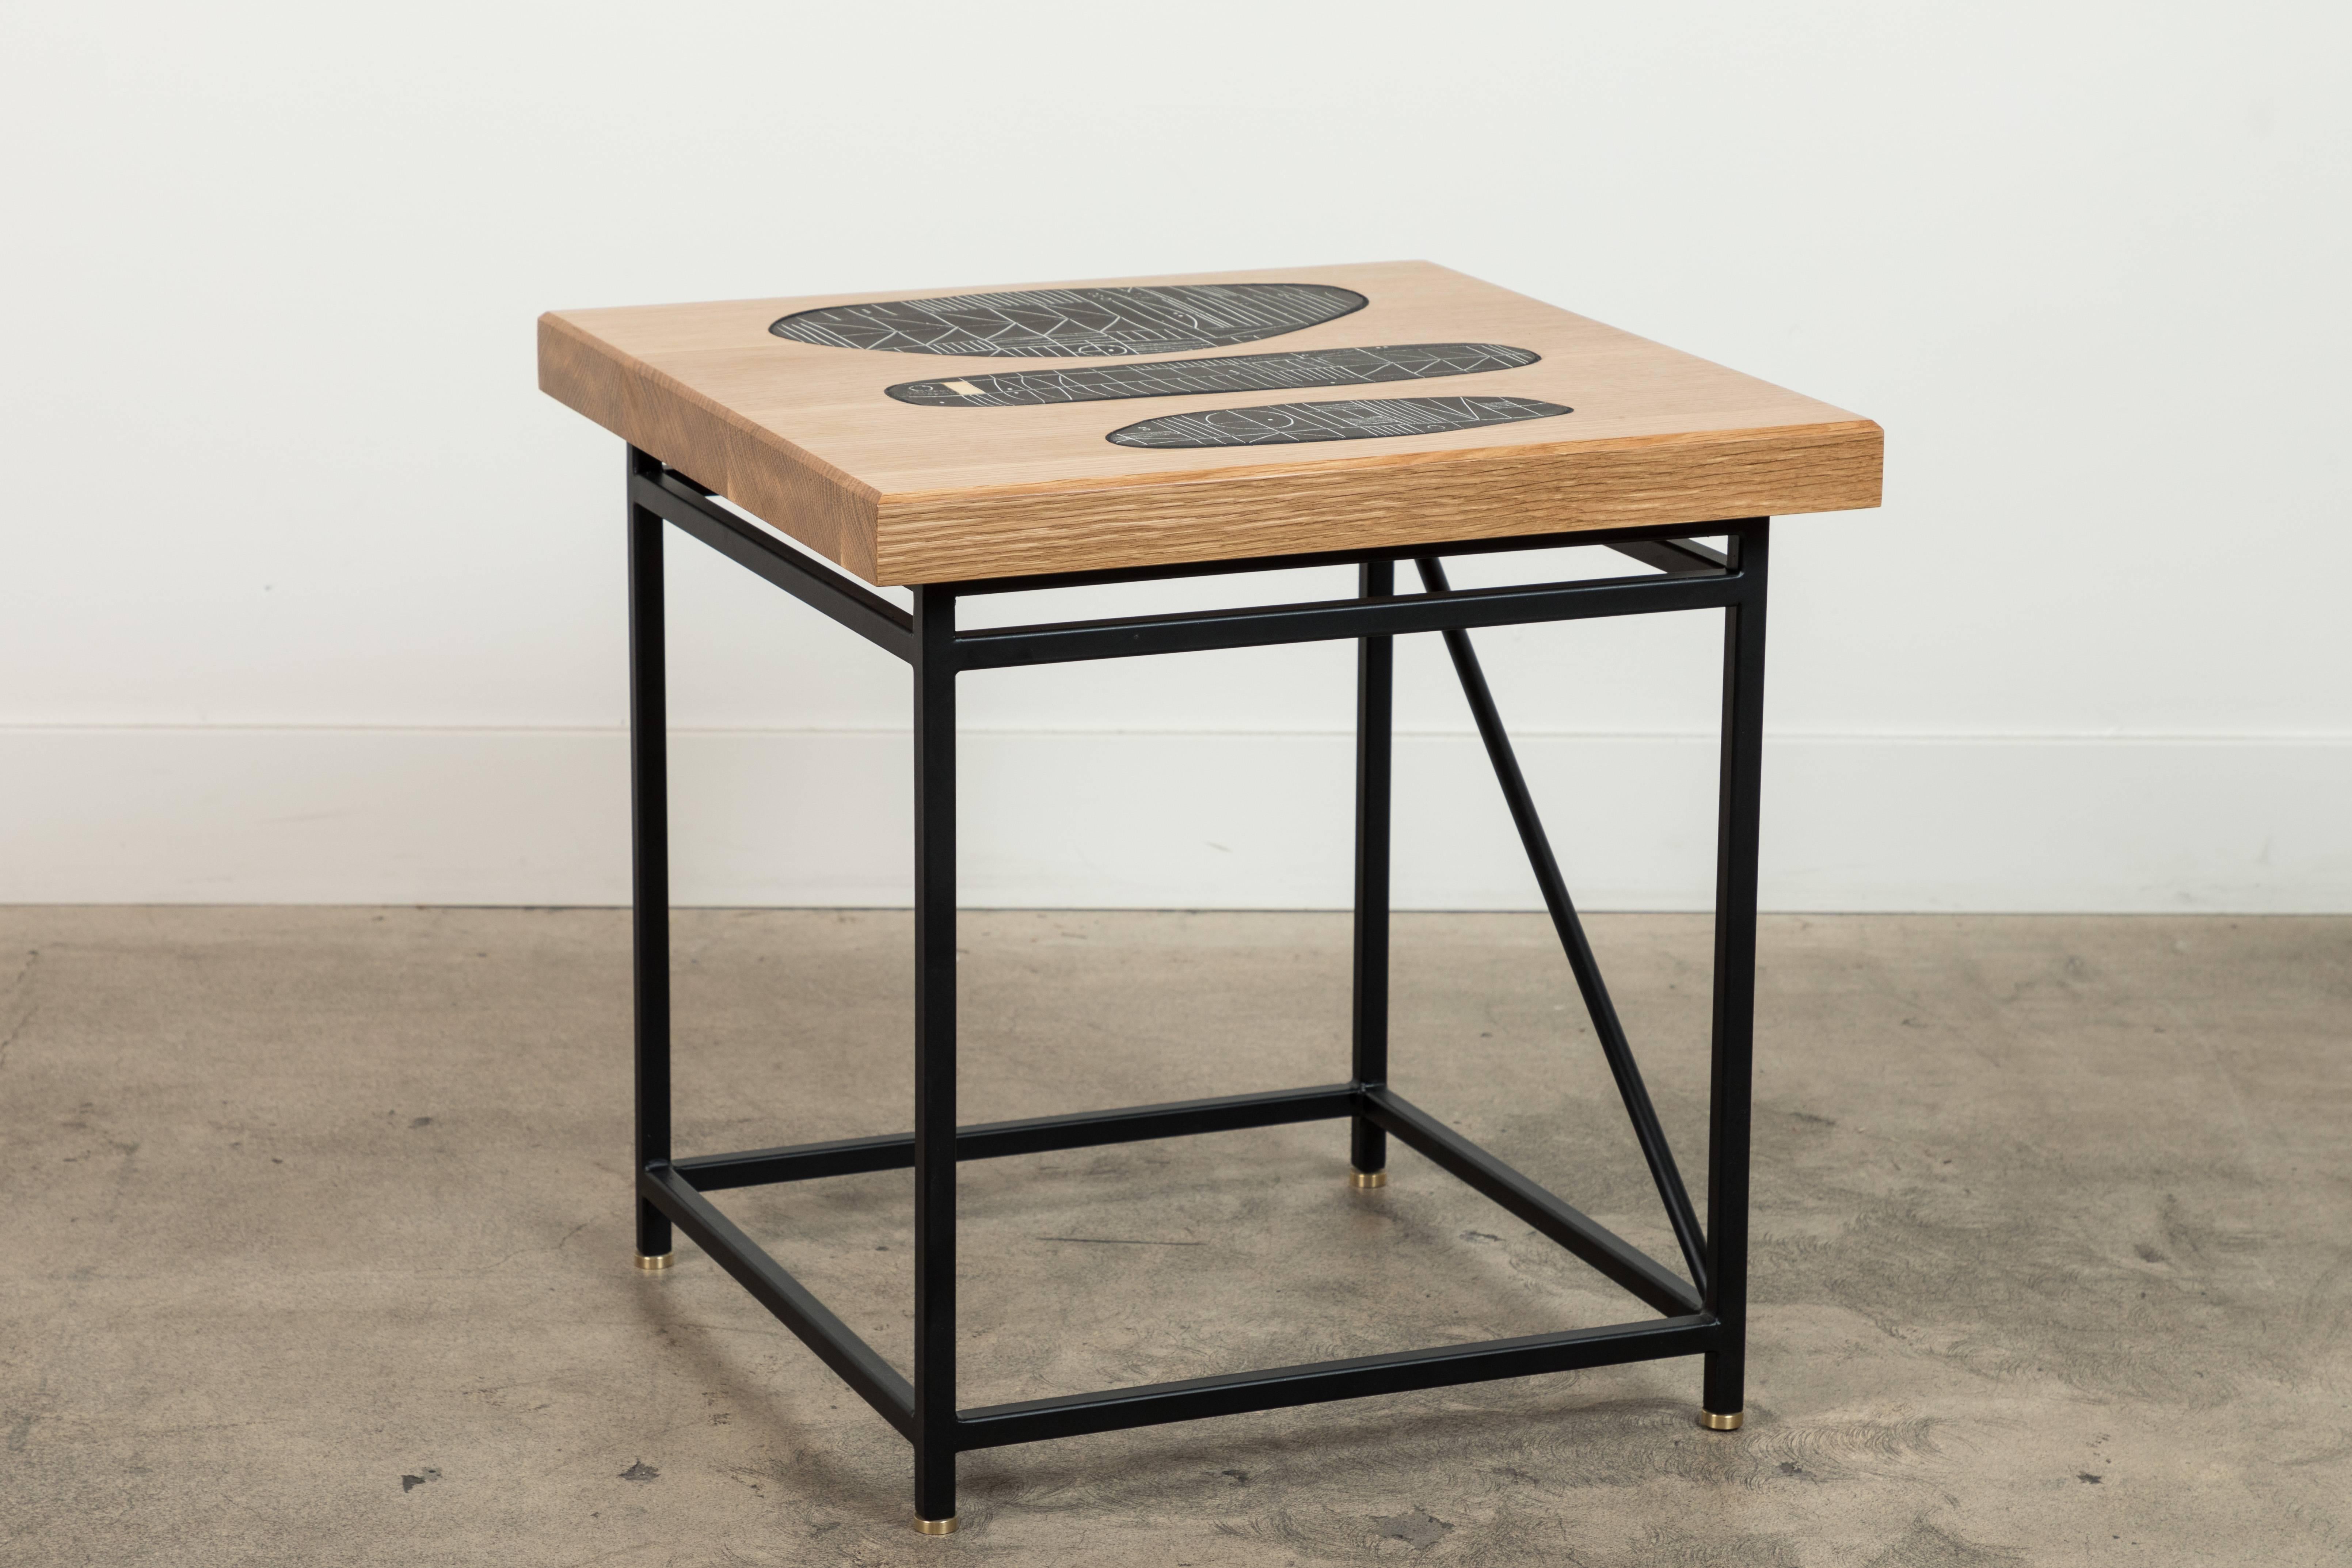 Steel Solid Walnut and Ceramic Side Table by Heather Rosenman for Collabs in Clay